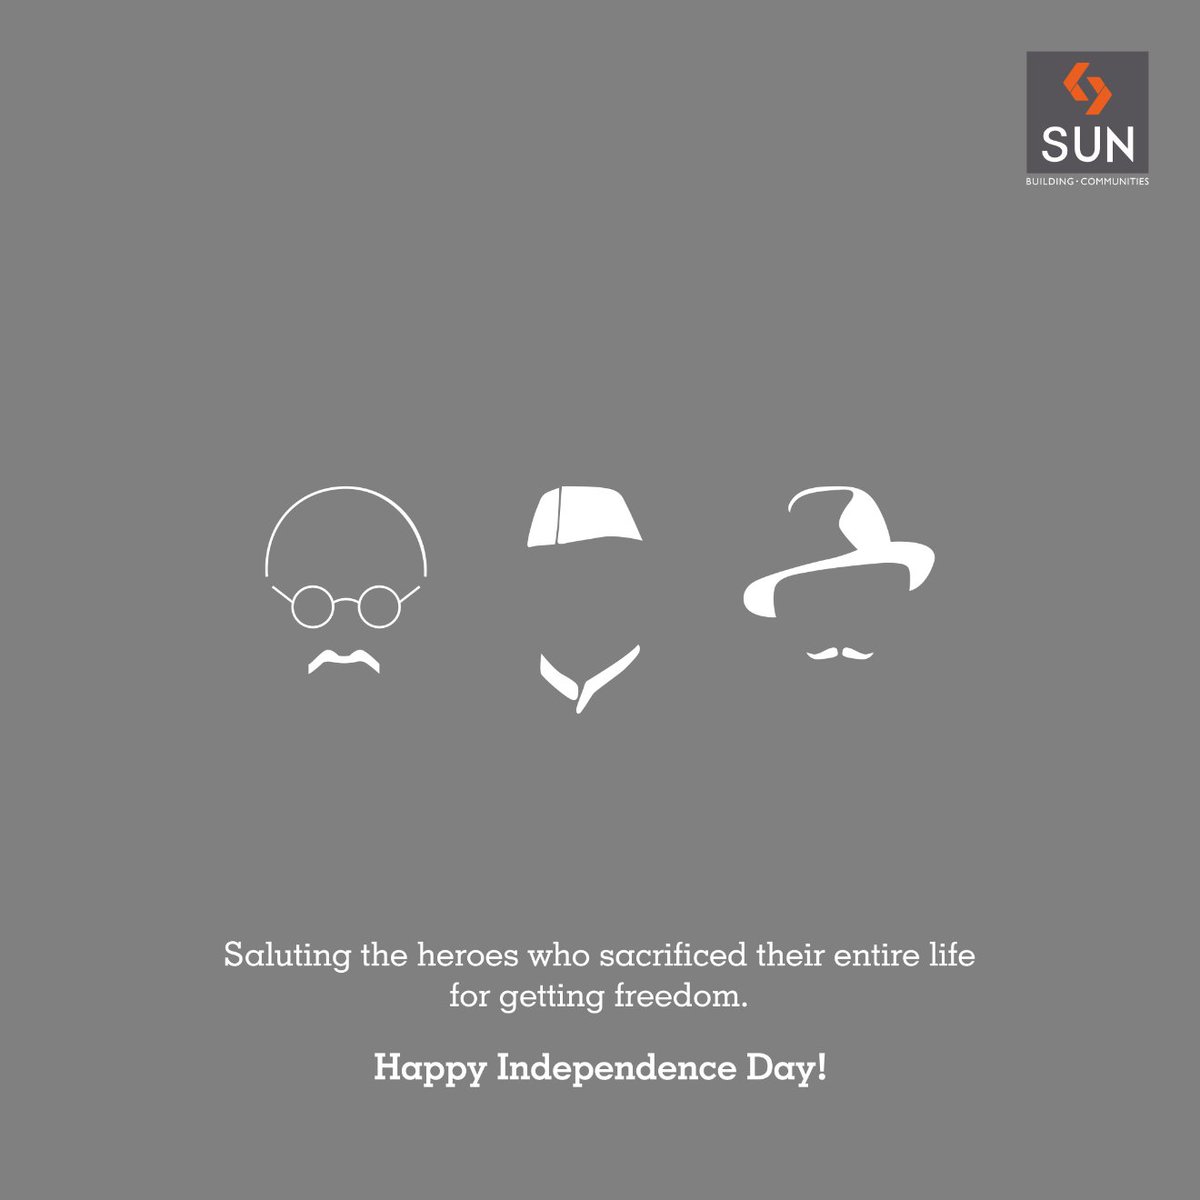 A million thanks will also fall short, compared to their countless #sacrifices. Happy #IndependenceDay! https://t.co/ZUkW41BNuR